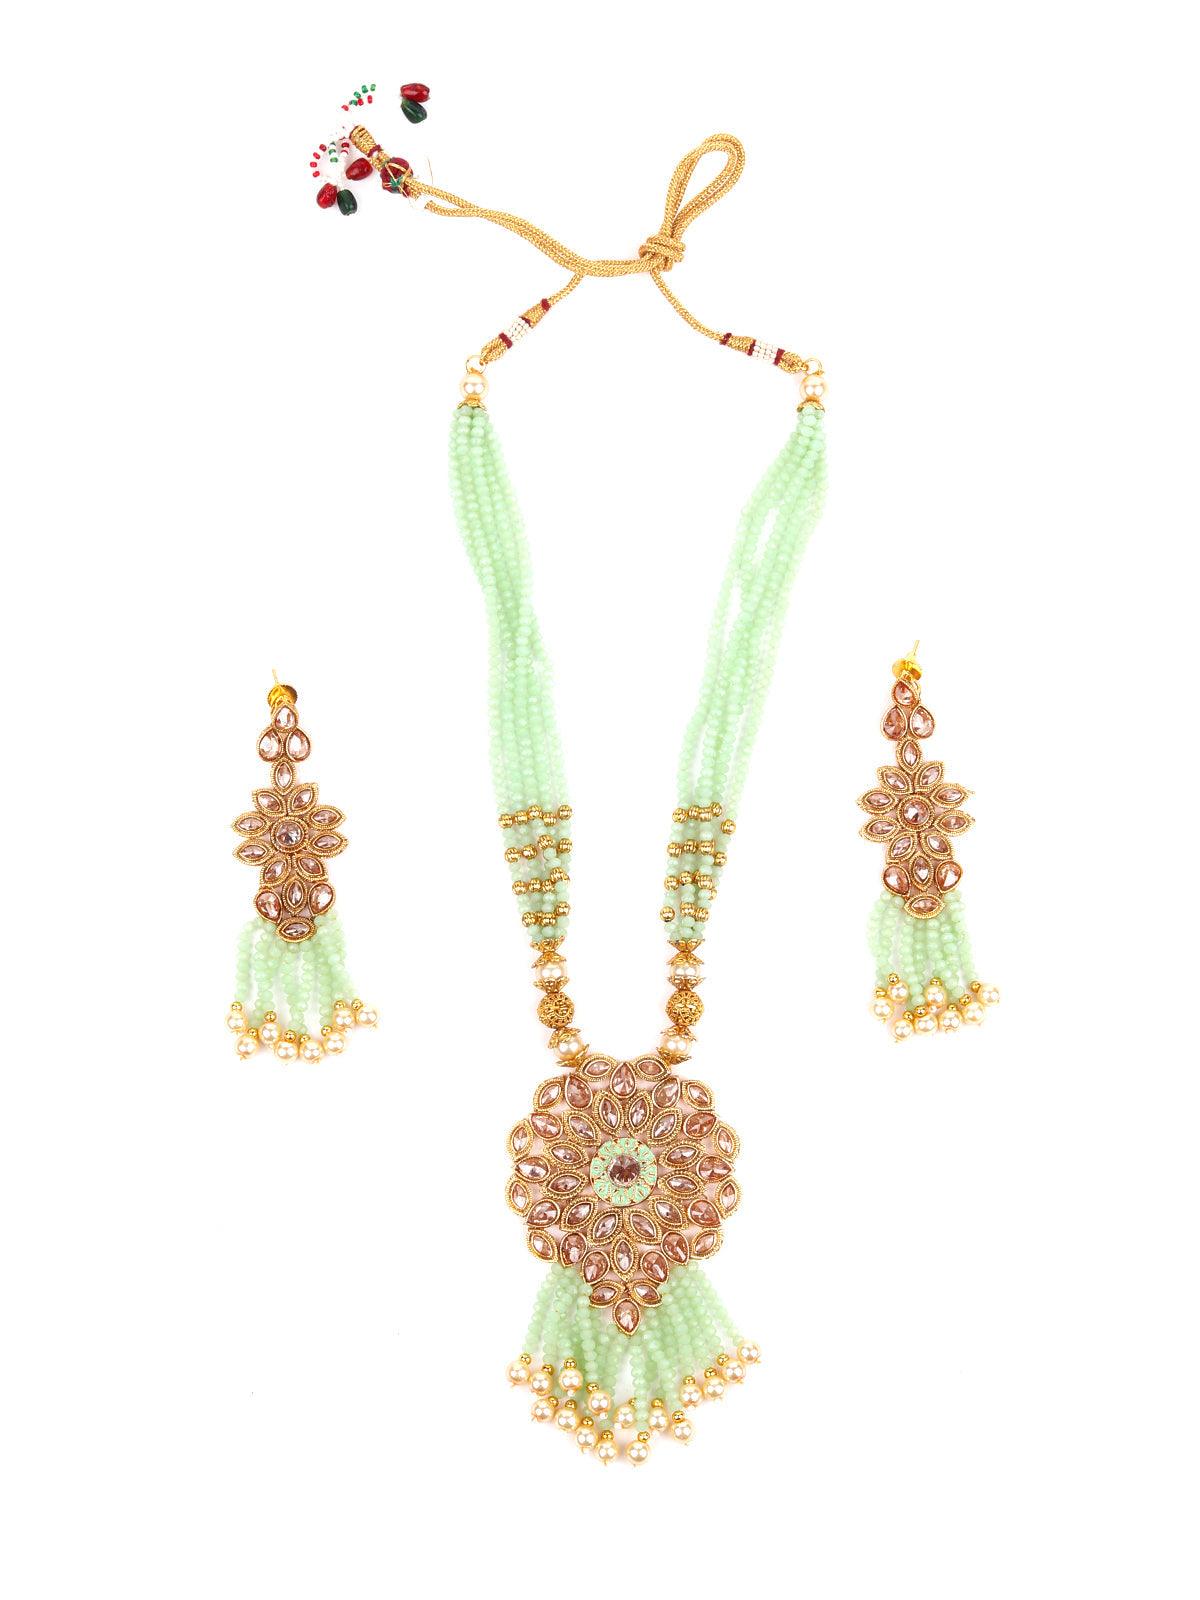 Multi-Strand Light Green Onyx Necklace with Earrings - Odette